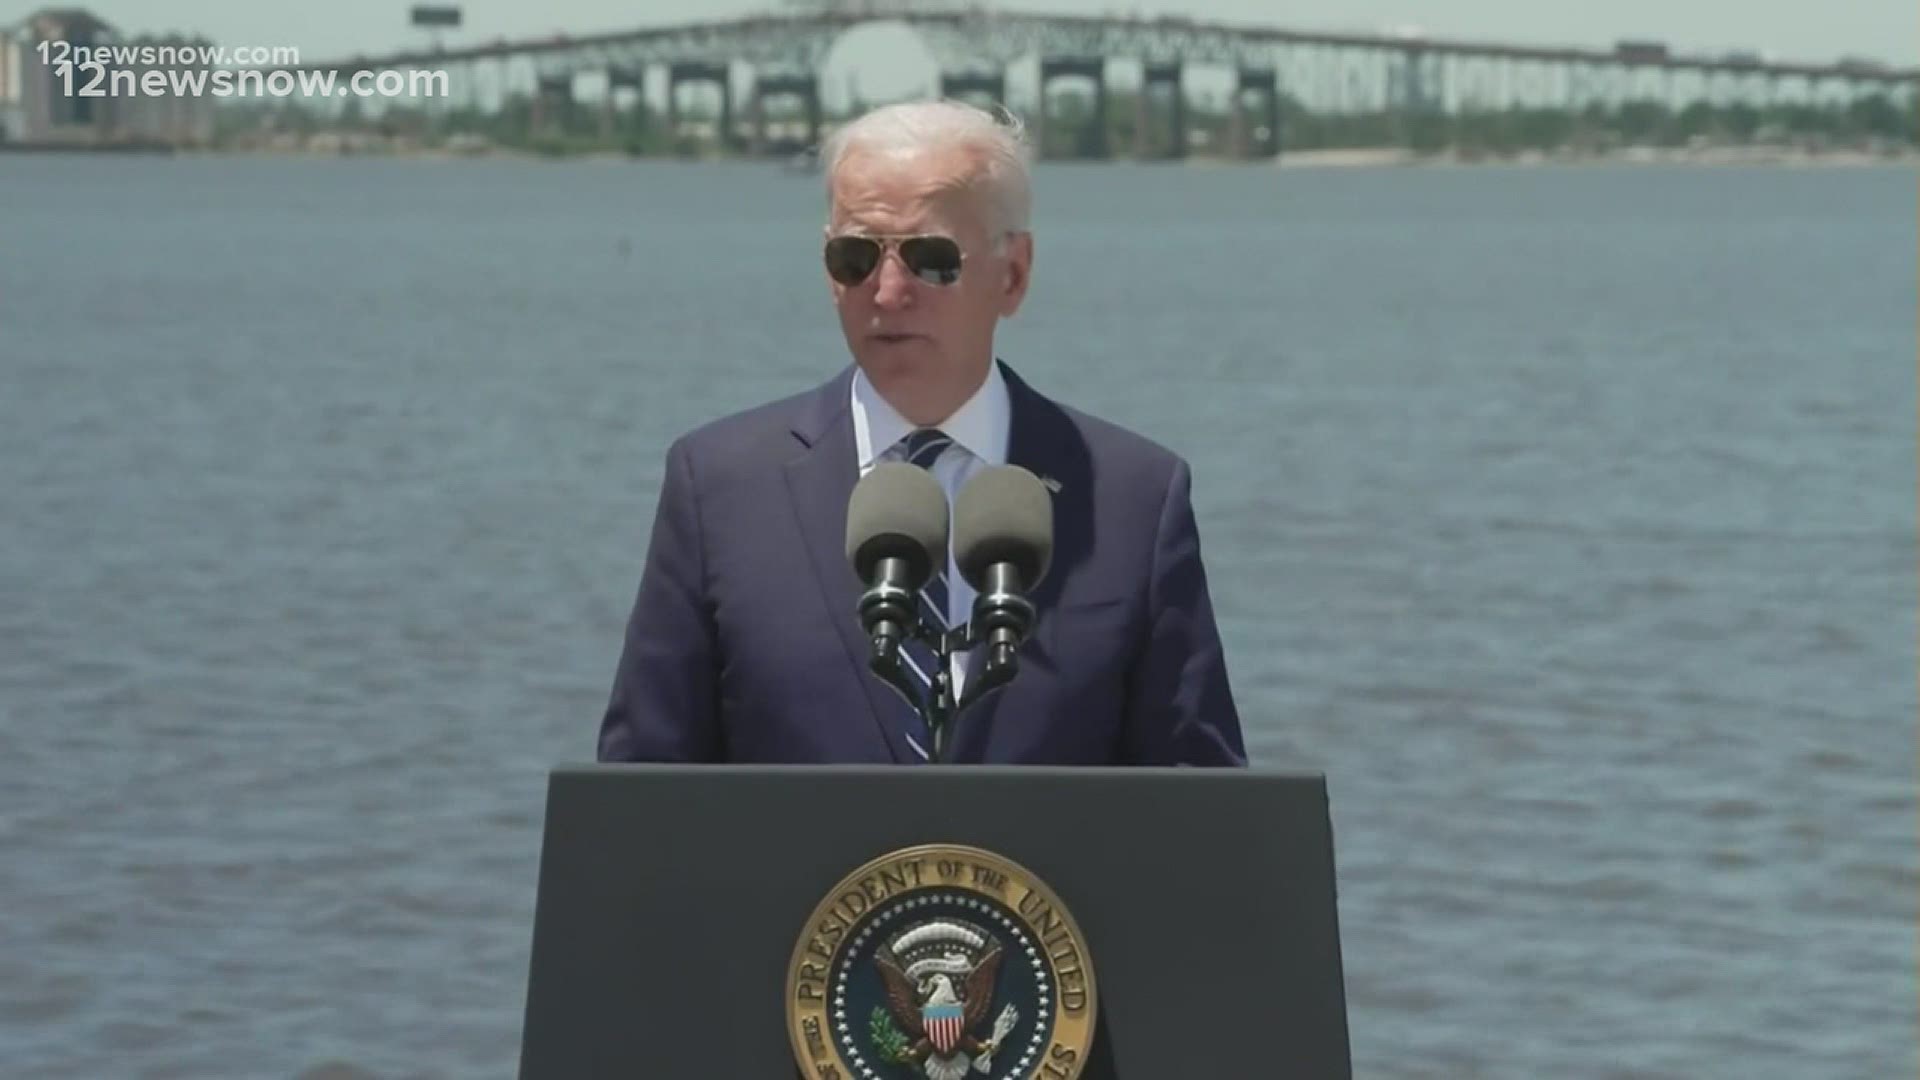 President Joe Biden pushed the case for his $2.3 trillion infrastructure plan in the reliably Republican state of Louisiana on Thursday.